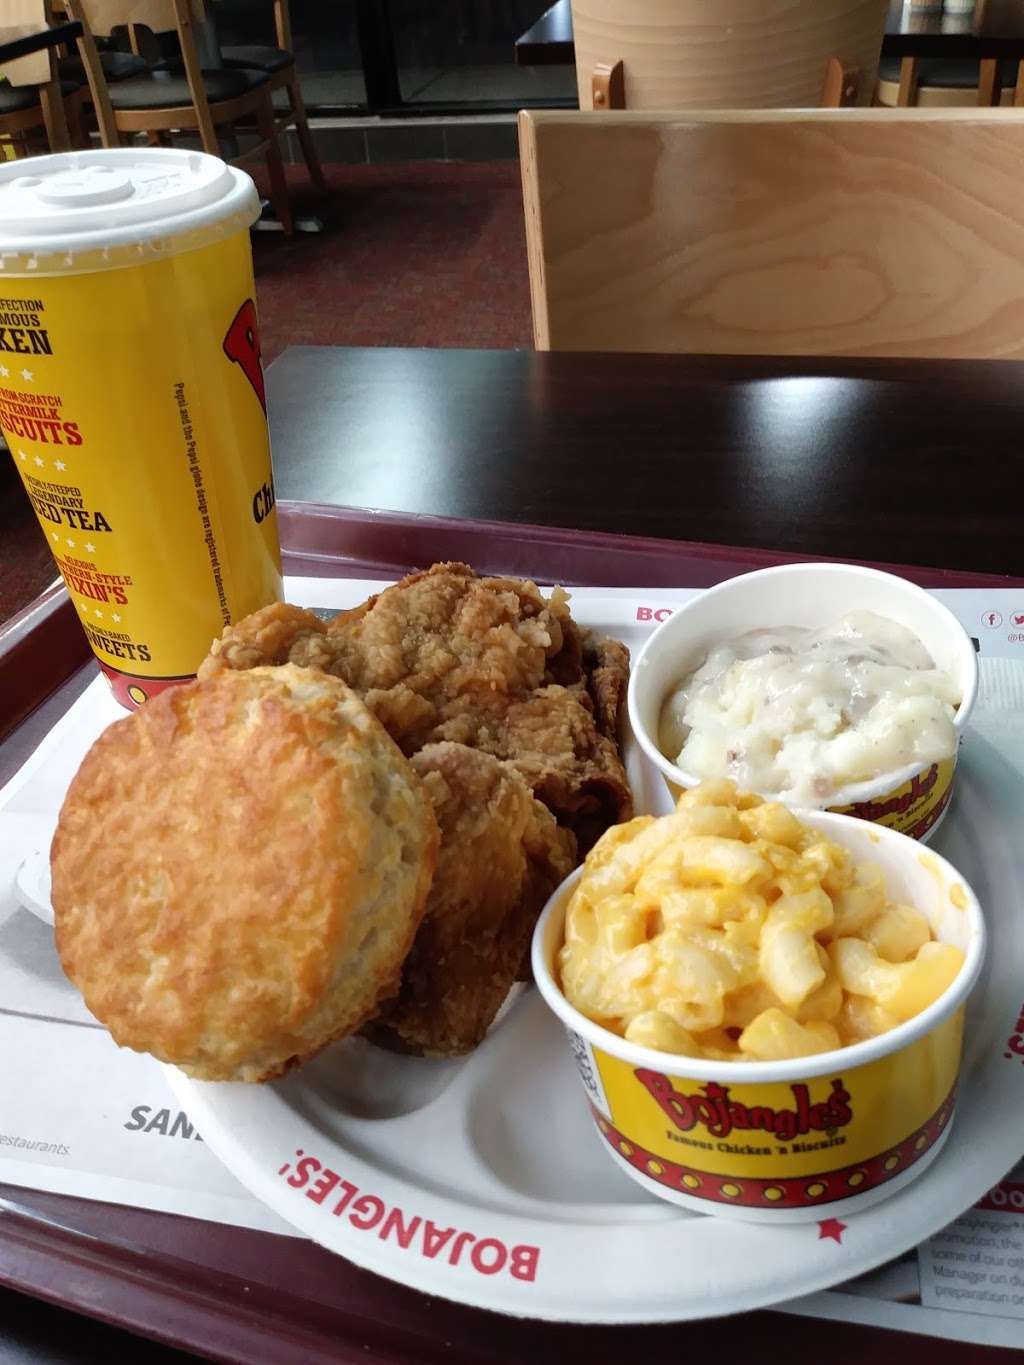 Bojangles Famous Chicken n Biscuits | 1657 Bessemer City Rd, Gastonia, NC 28052 | Phone: (704) 865-2644